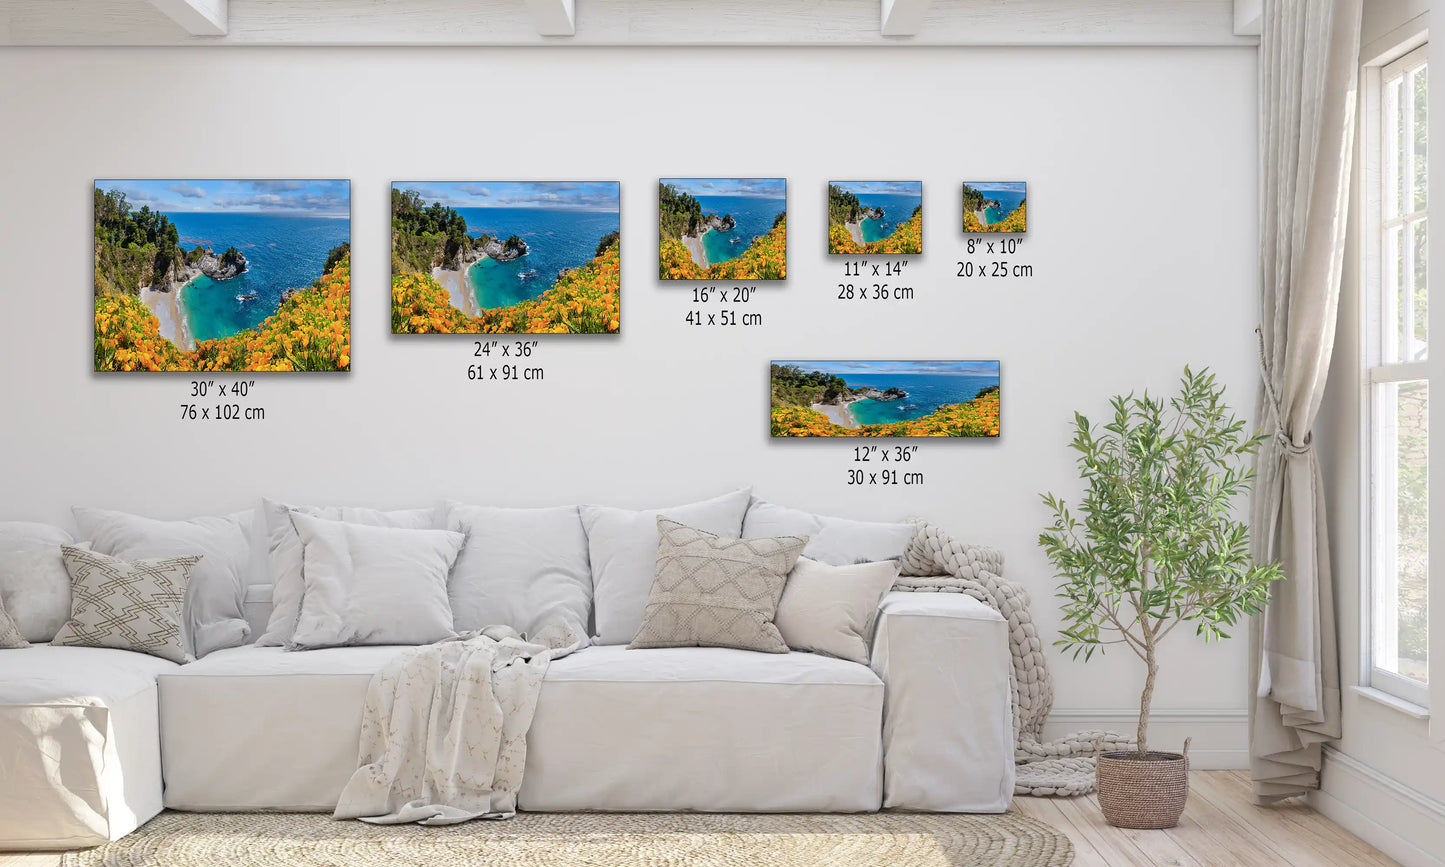 A display of various sized canvas prints of McWay Falls at Big Sur, indicating dimensions for home decor arrangement.